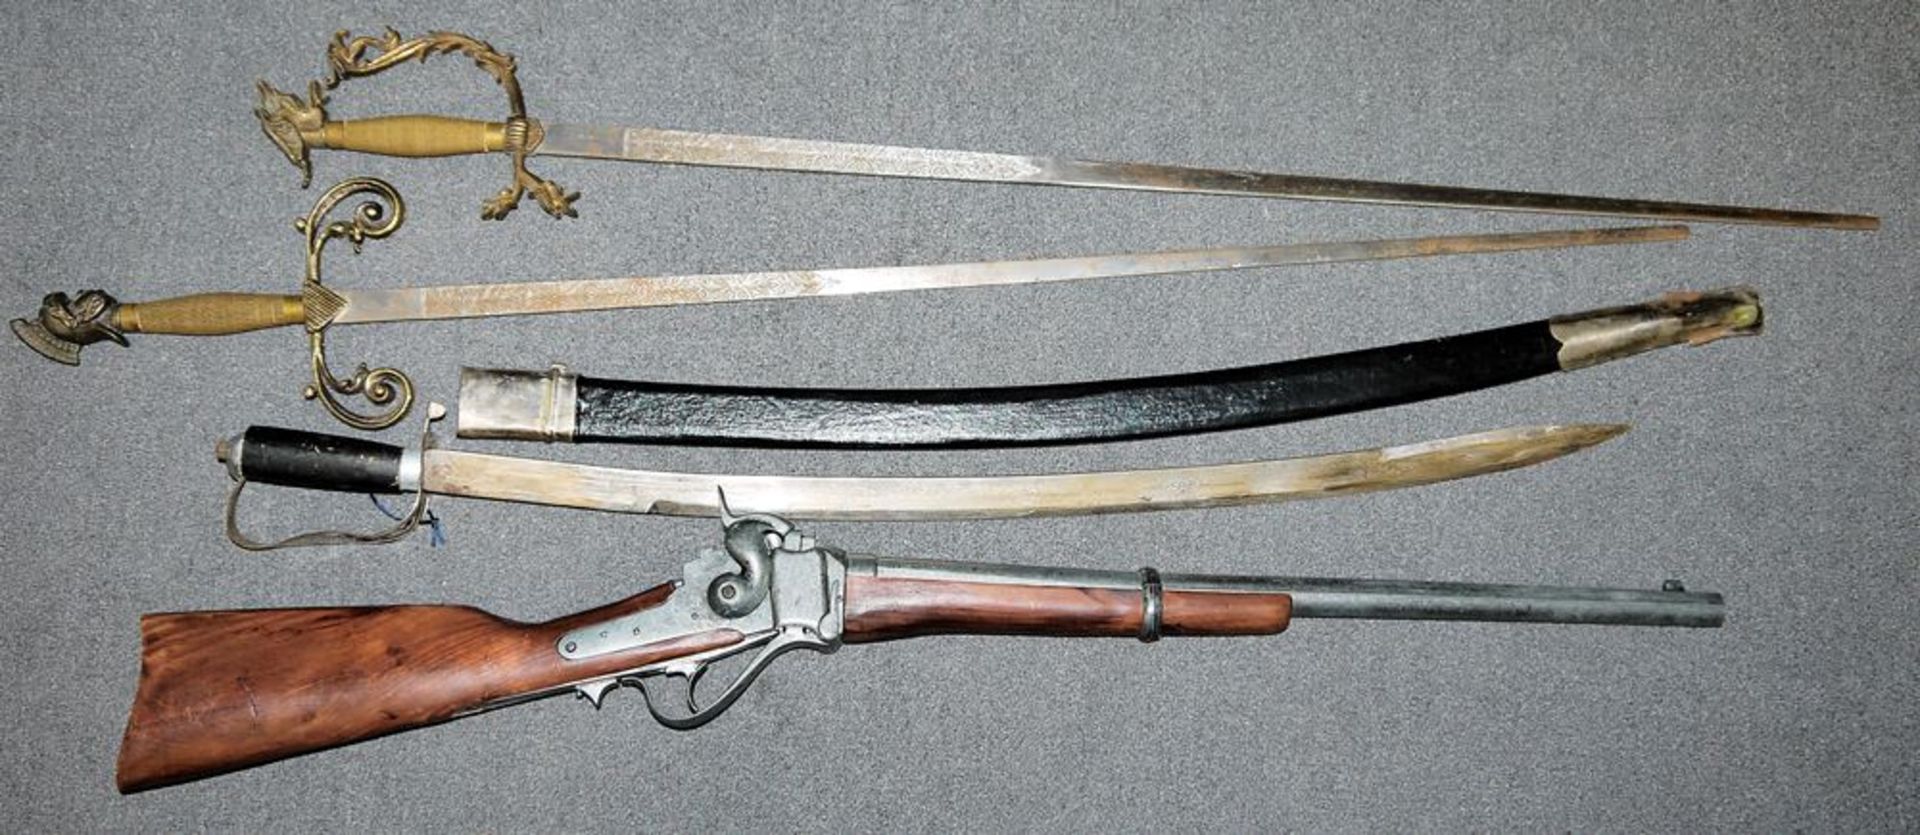 Four decorative weapons of the 20th century